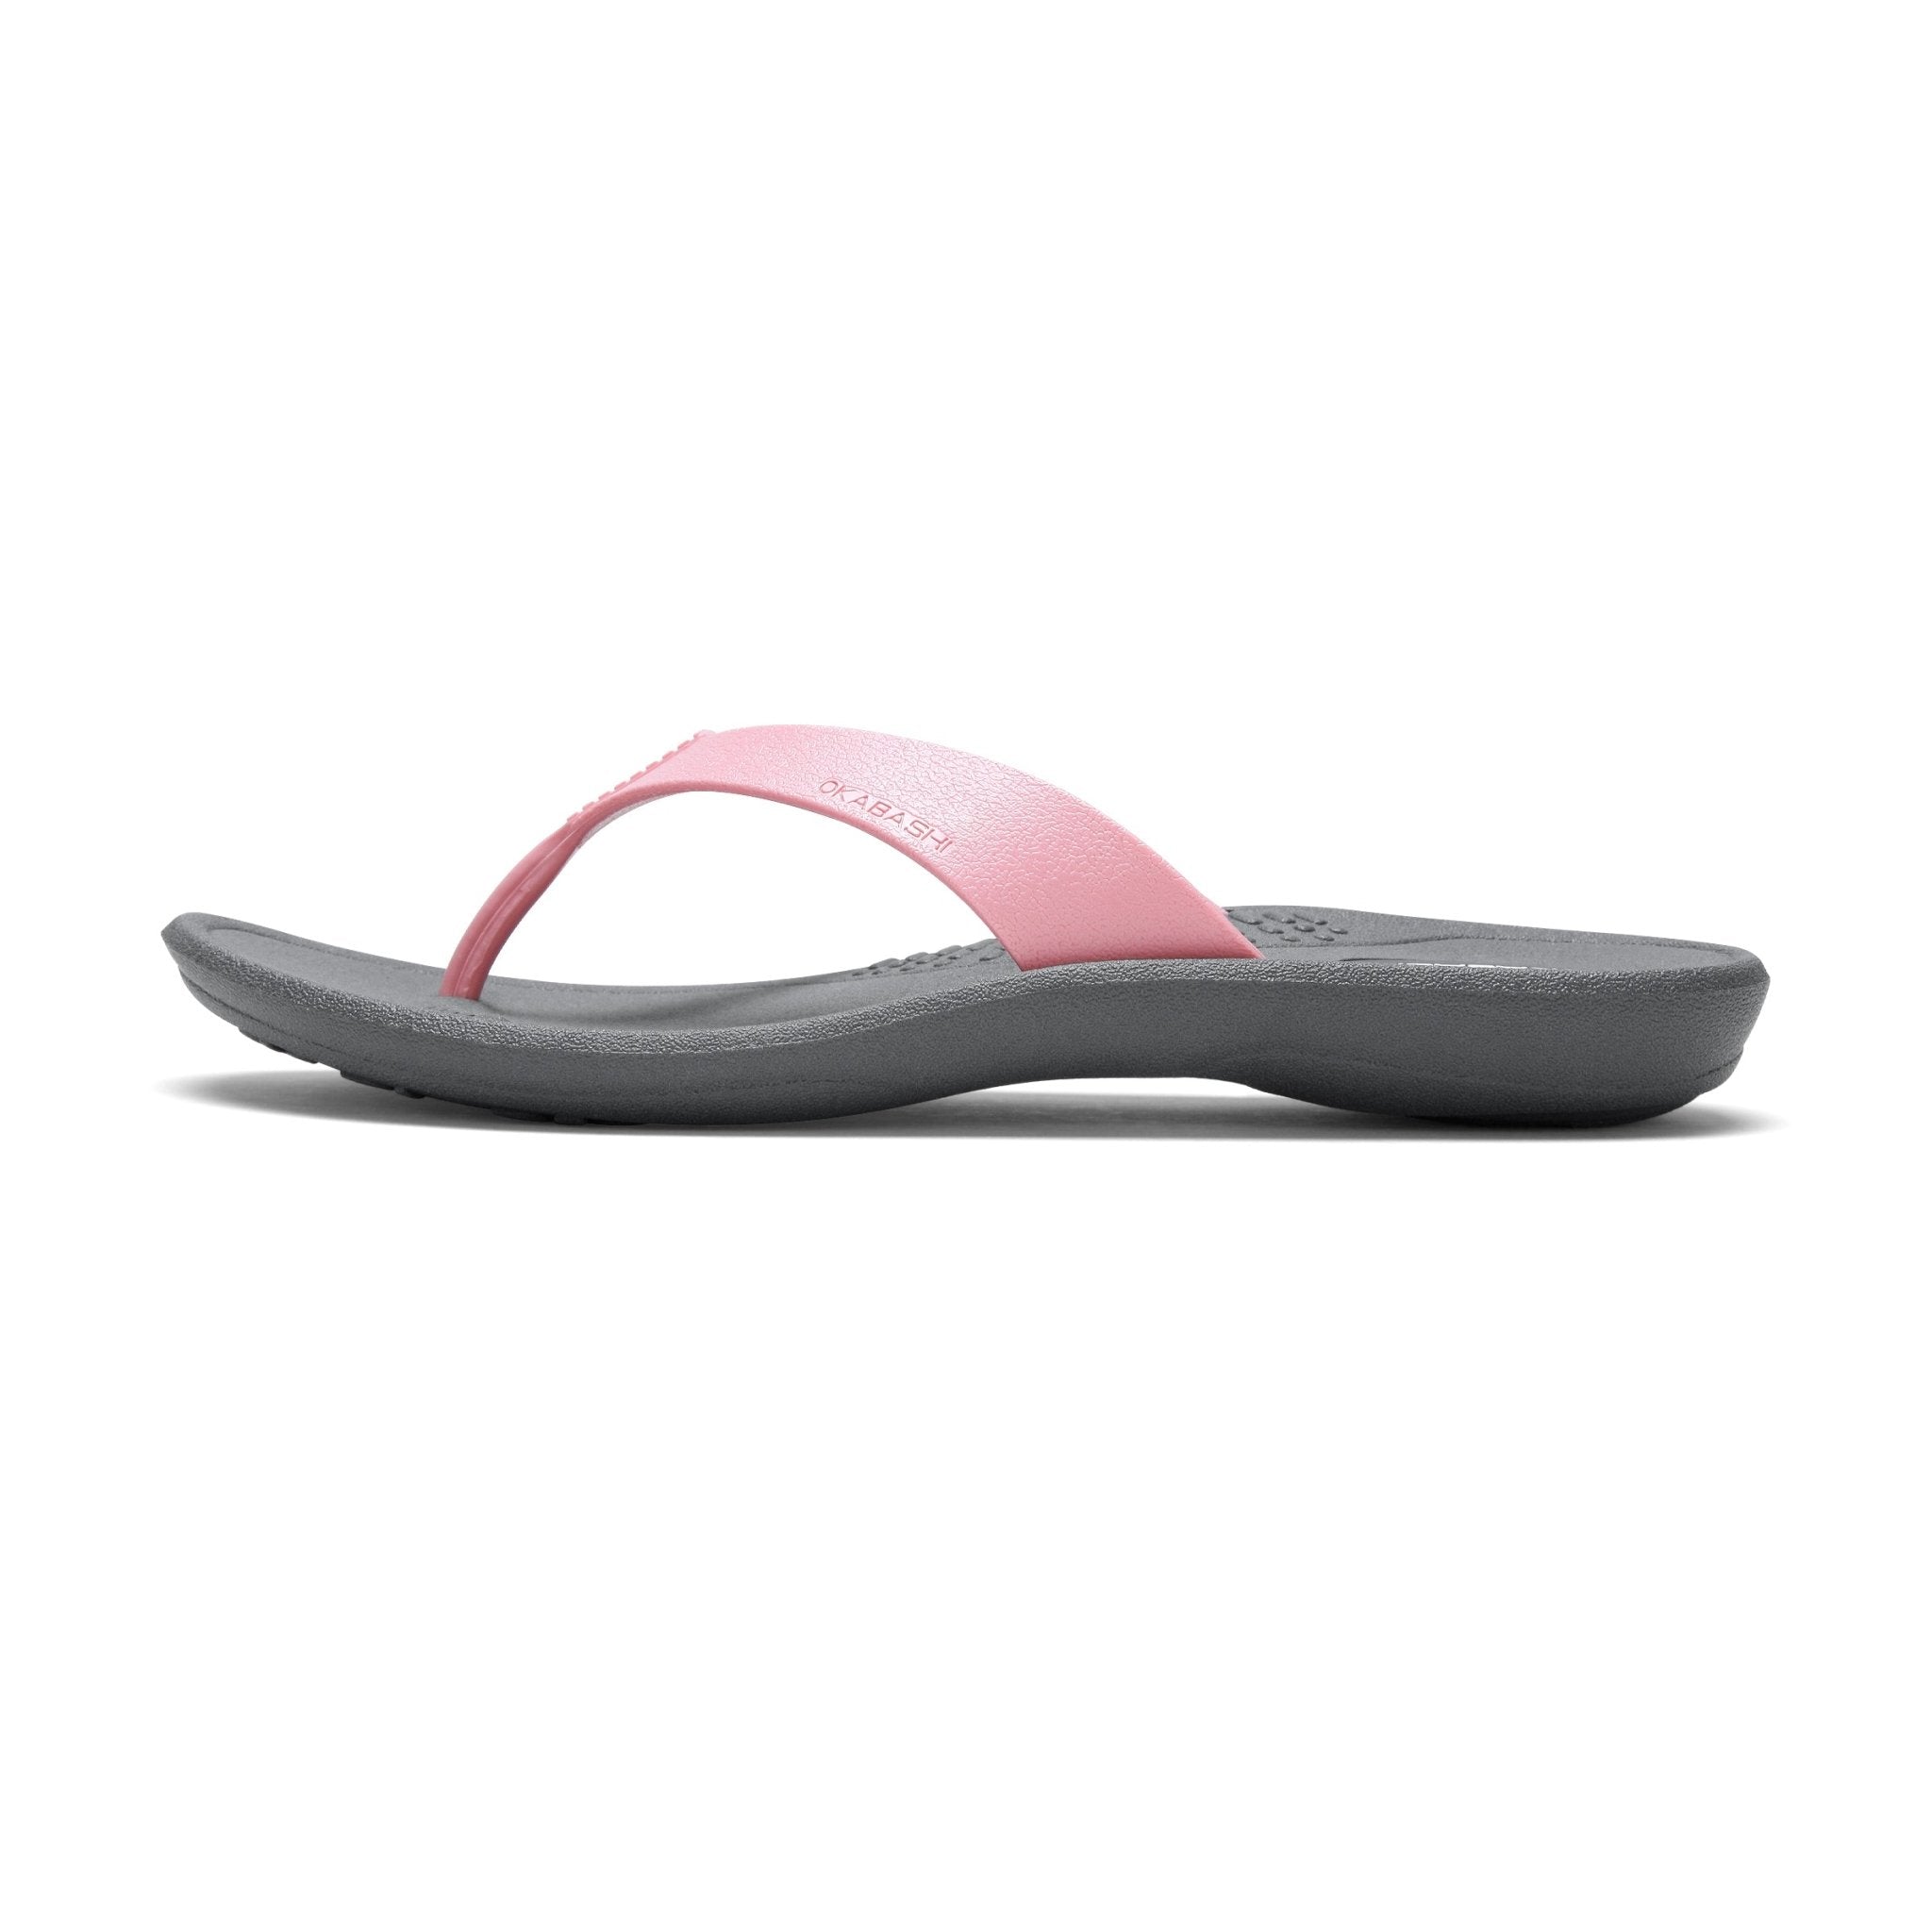 Breeze | Comfortable Women's Flip Flop | Made in the USA | Okabashi Shoes